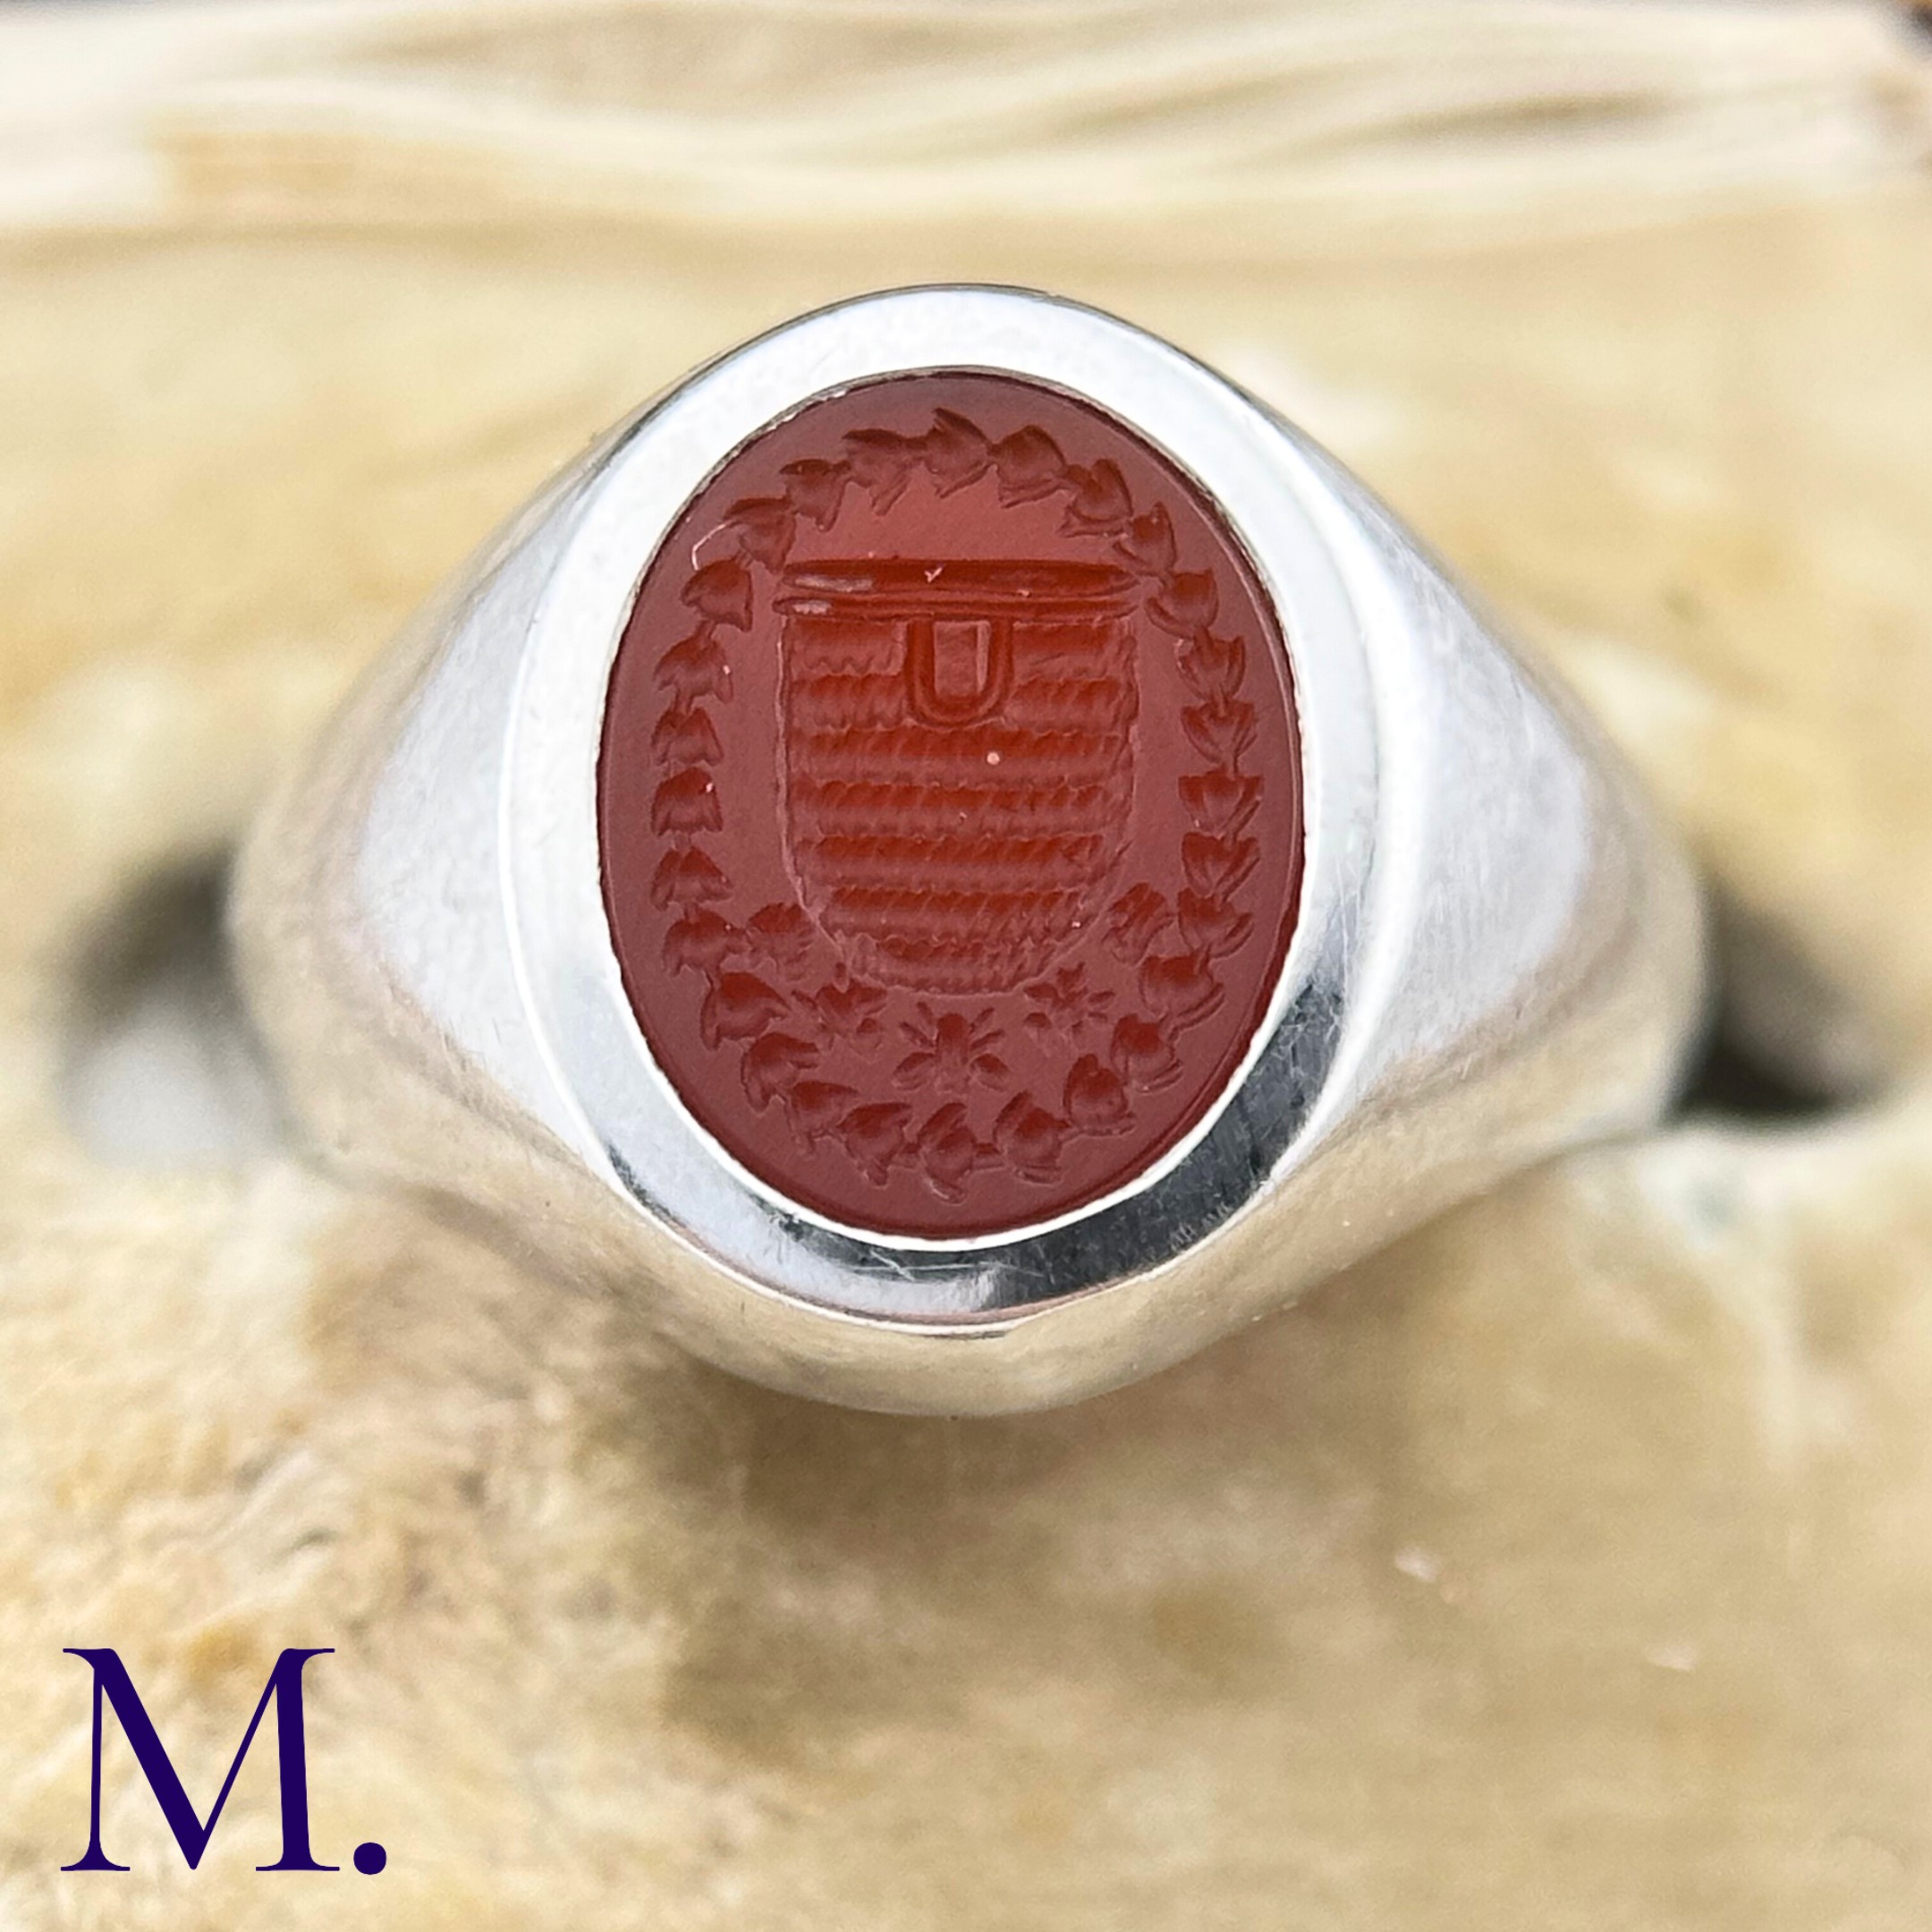 A Platinum and Carnelian Signet Ring The platinum ring is set with a carved oval-shaped carnelian